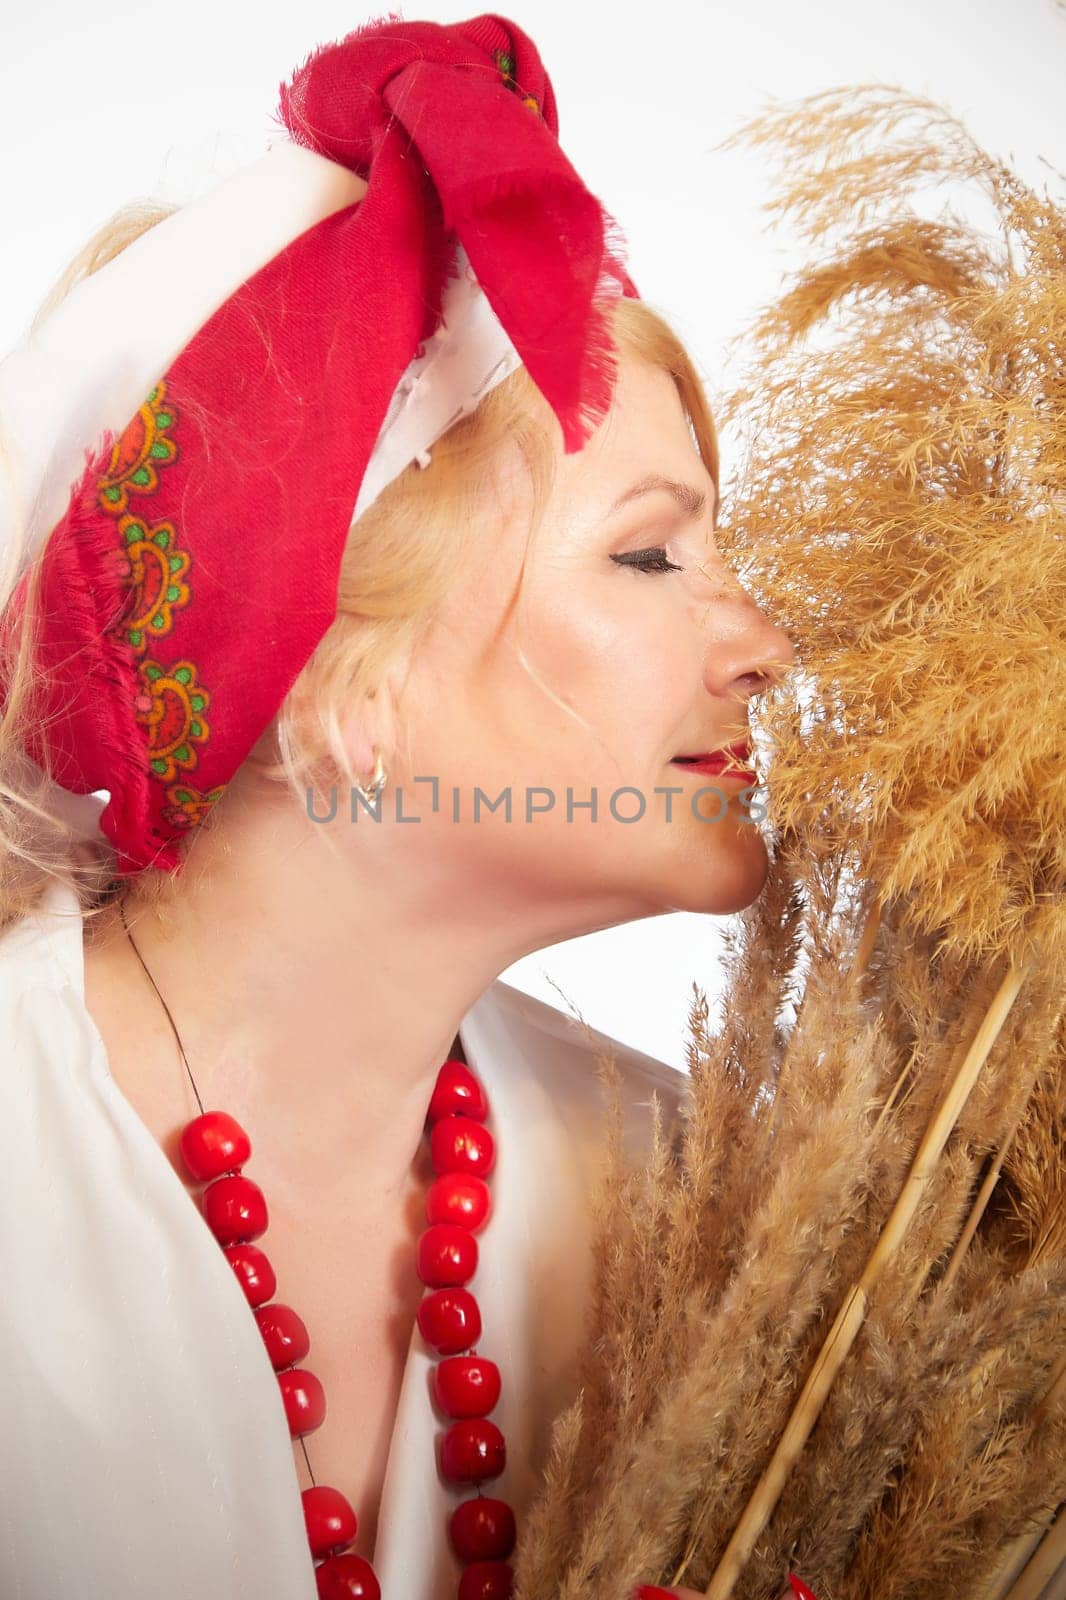 Portrait of heerful funny adult mature woman solokha with sheaf of ears. Female model in national ethnic Slavic style. Stylized Ukrainian, Belarusian or Russian woman in comic photo shoot